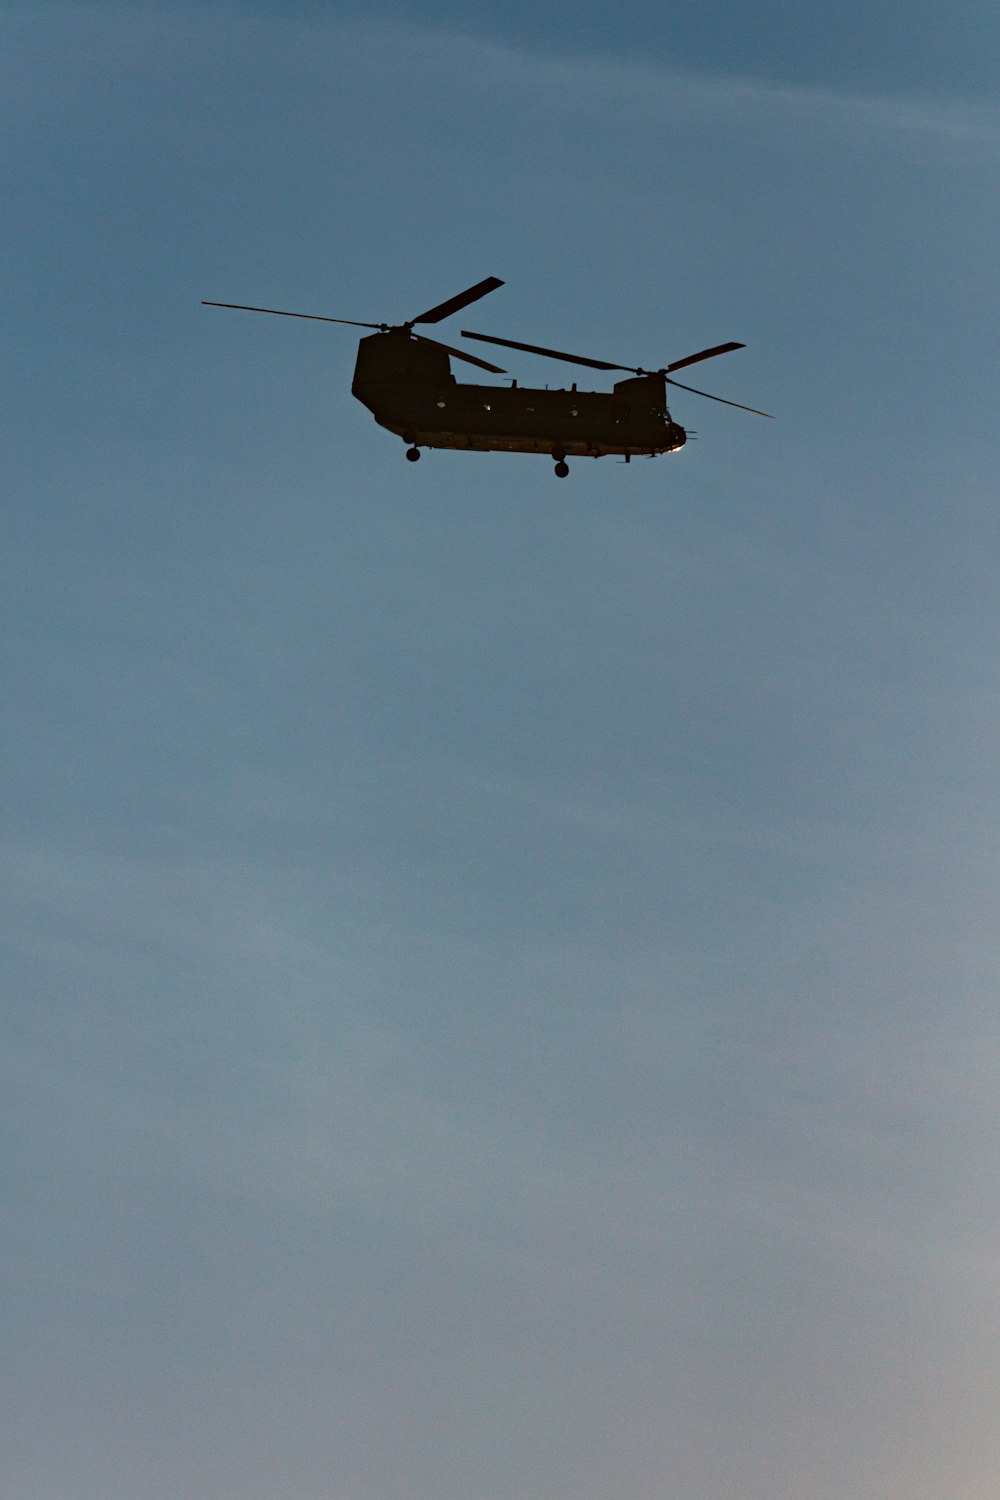 brown and black helicopter flying in the sky